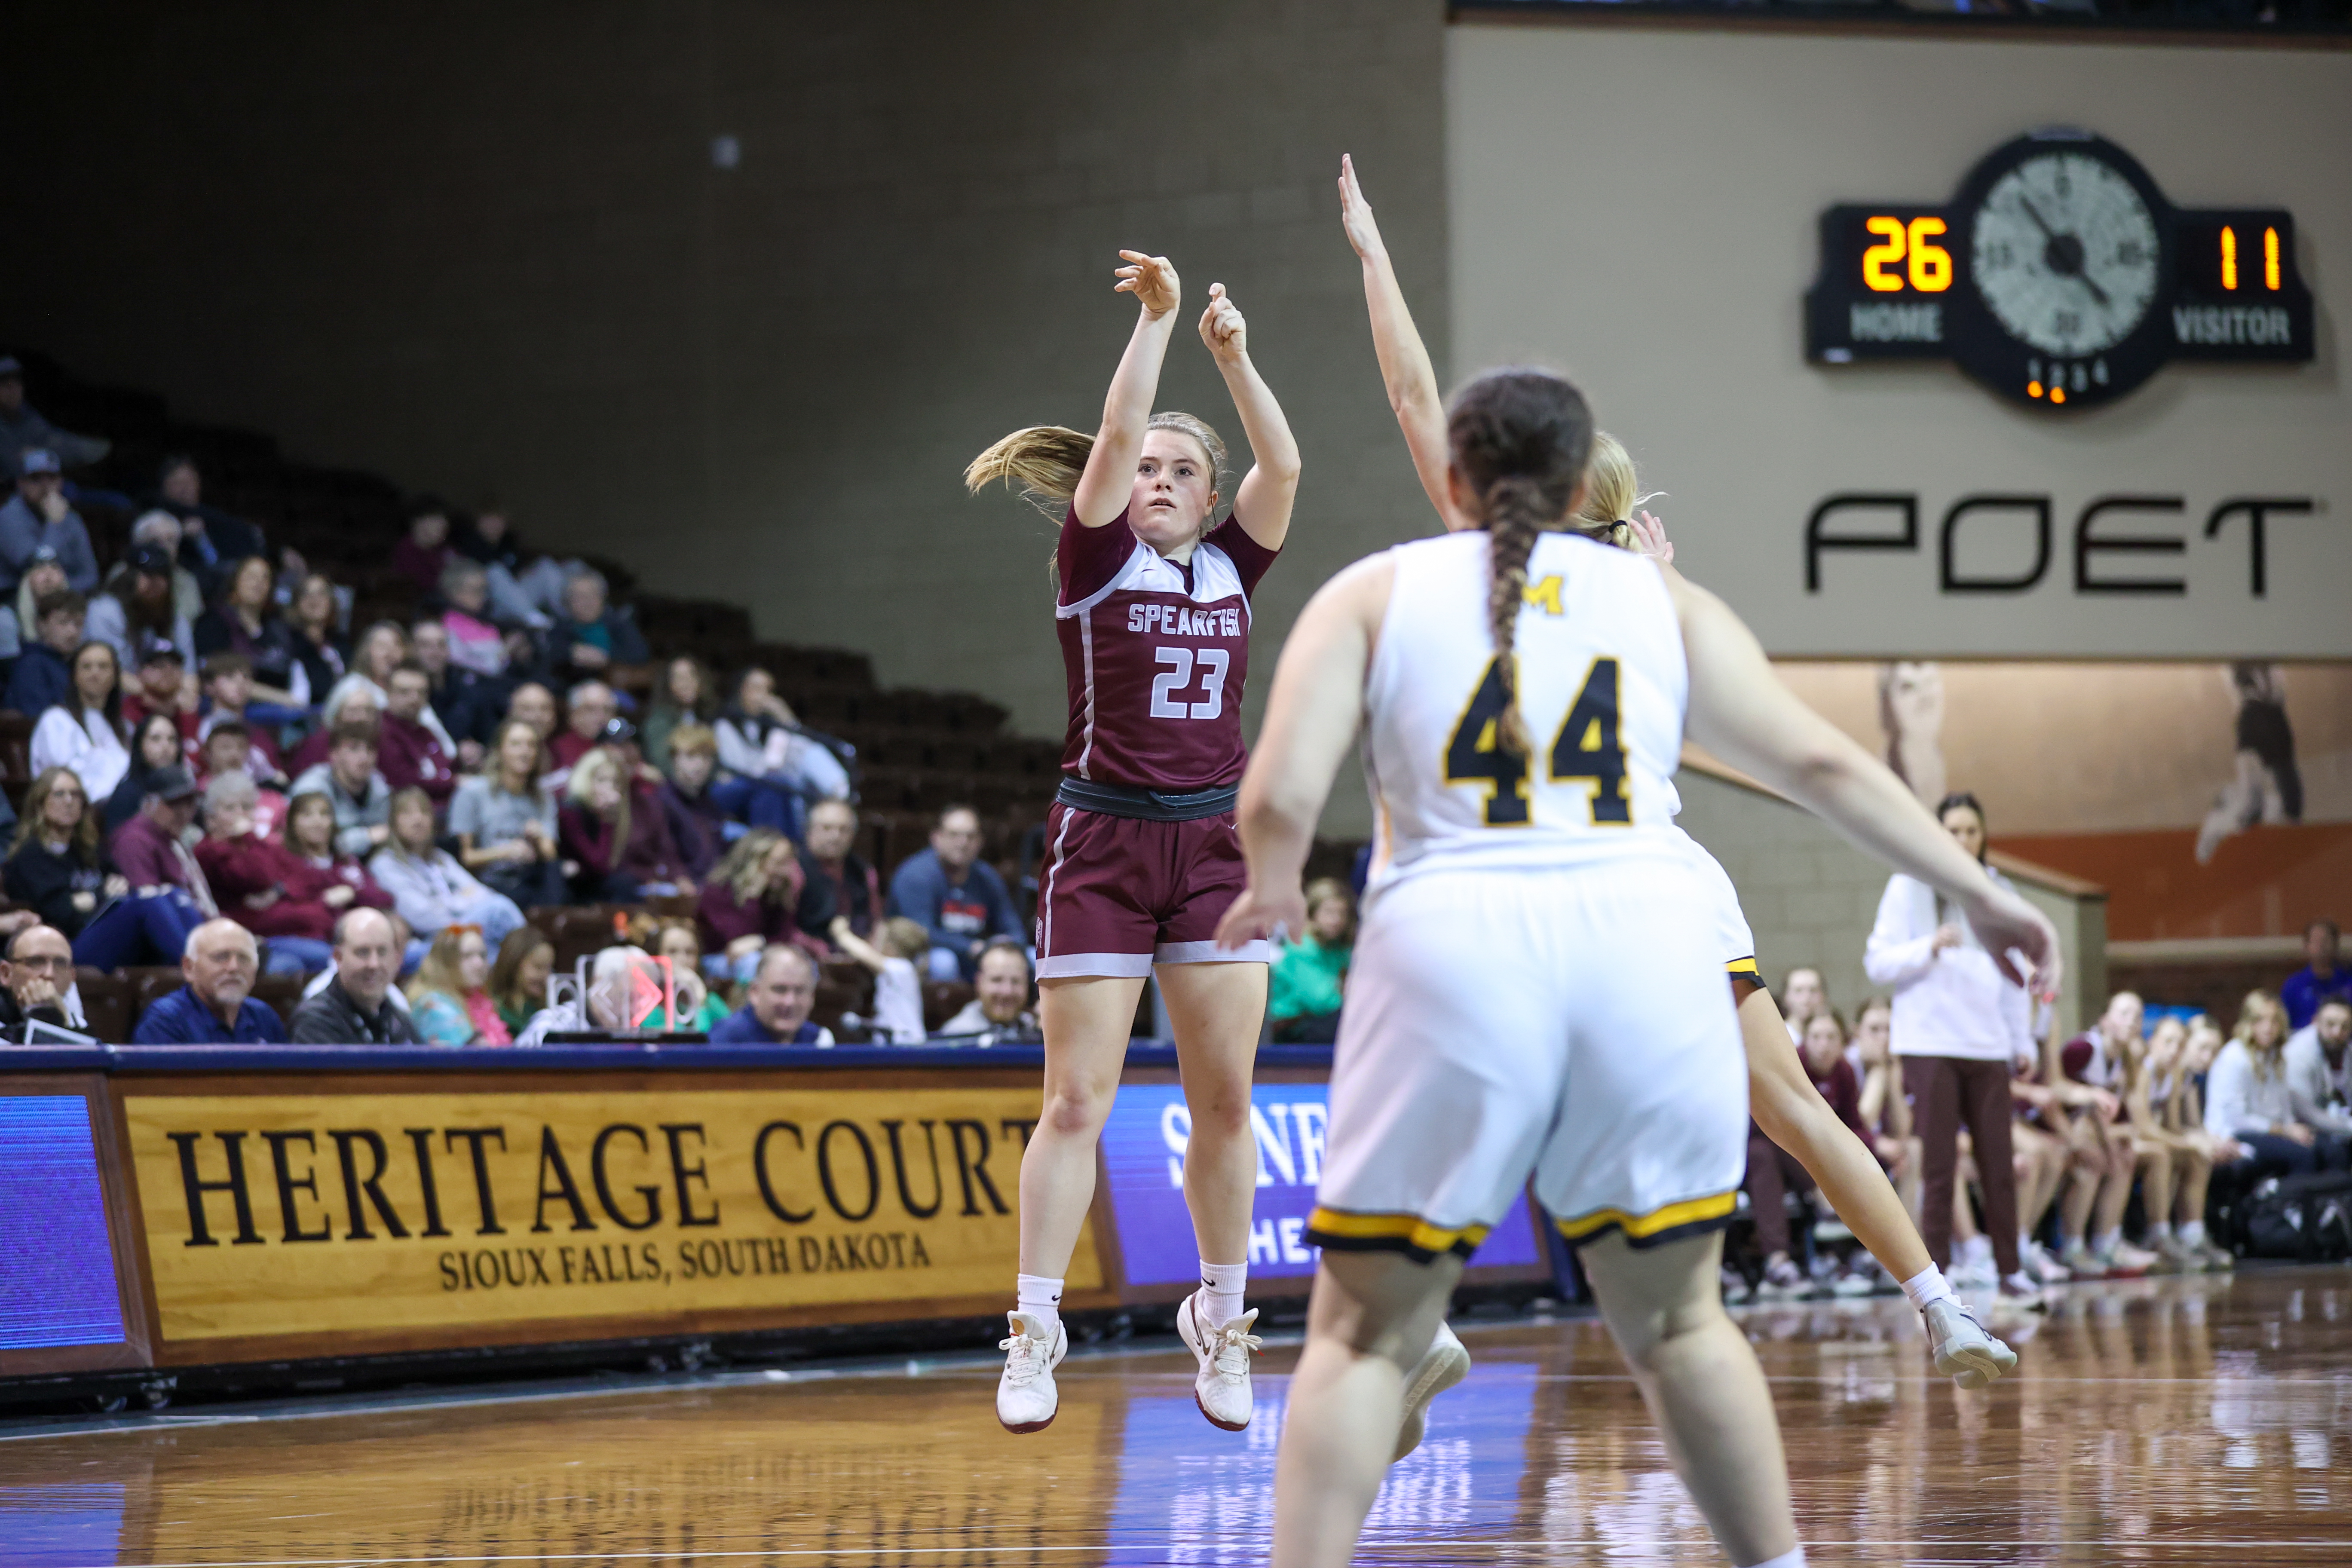 Check out the photos and videos of the women's basketball recruiting profile Kate Scharf